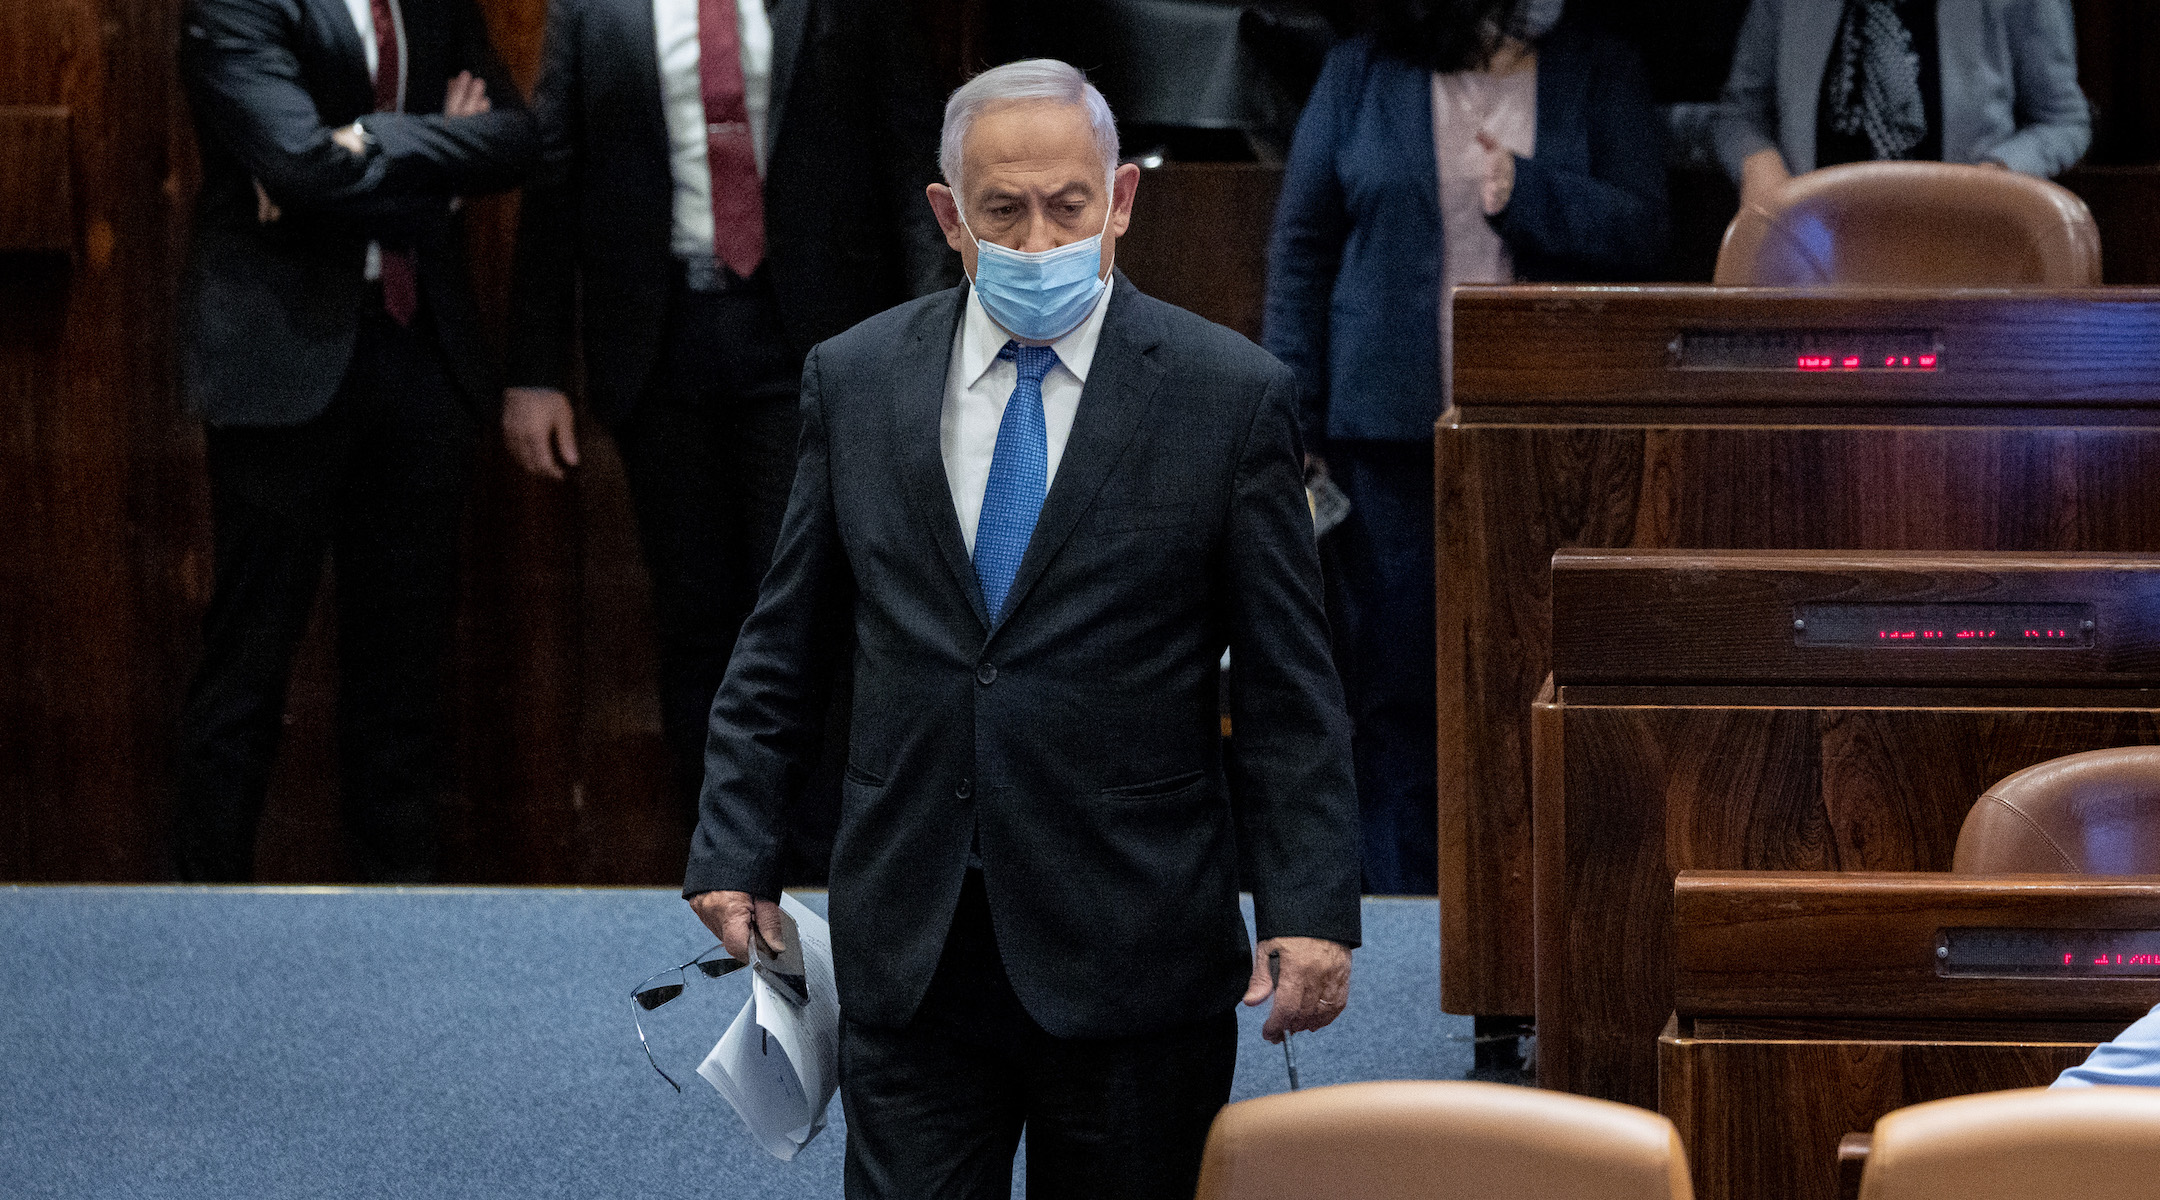 Netanyahu is considering a plea deal in his corruption cases that could bar him from politics for years, reports claim – Jewish Telegraphic Agency